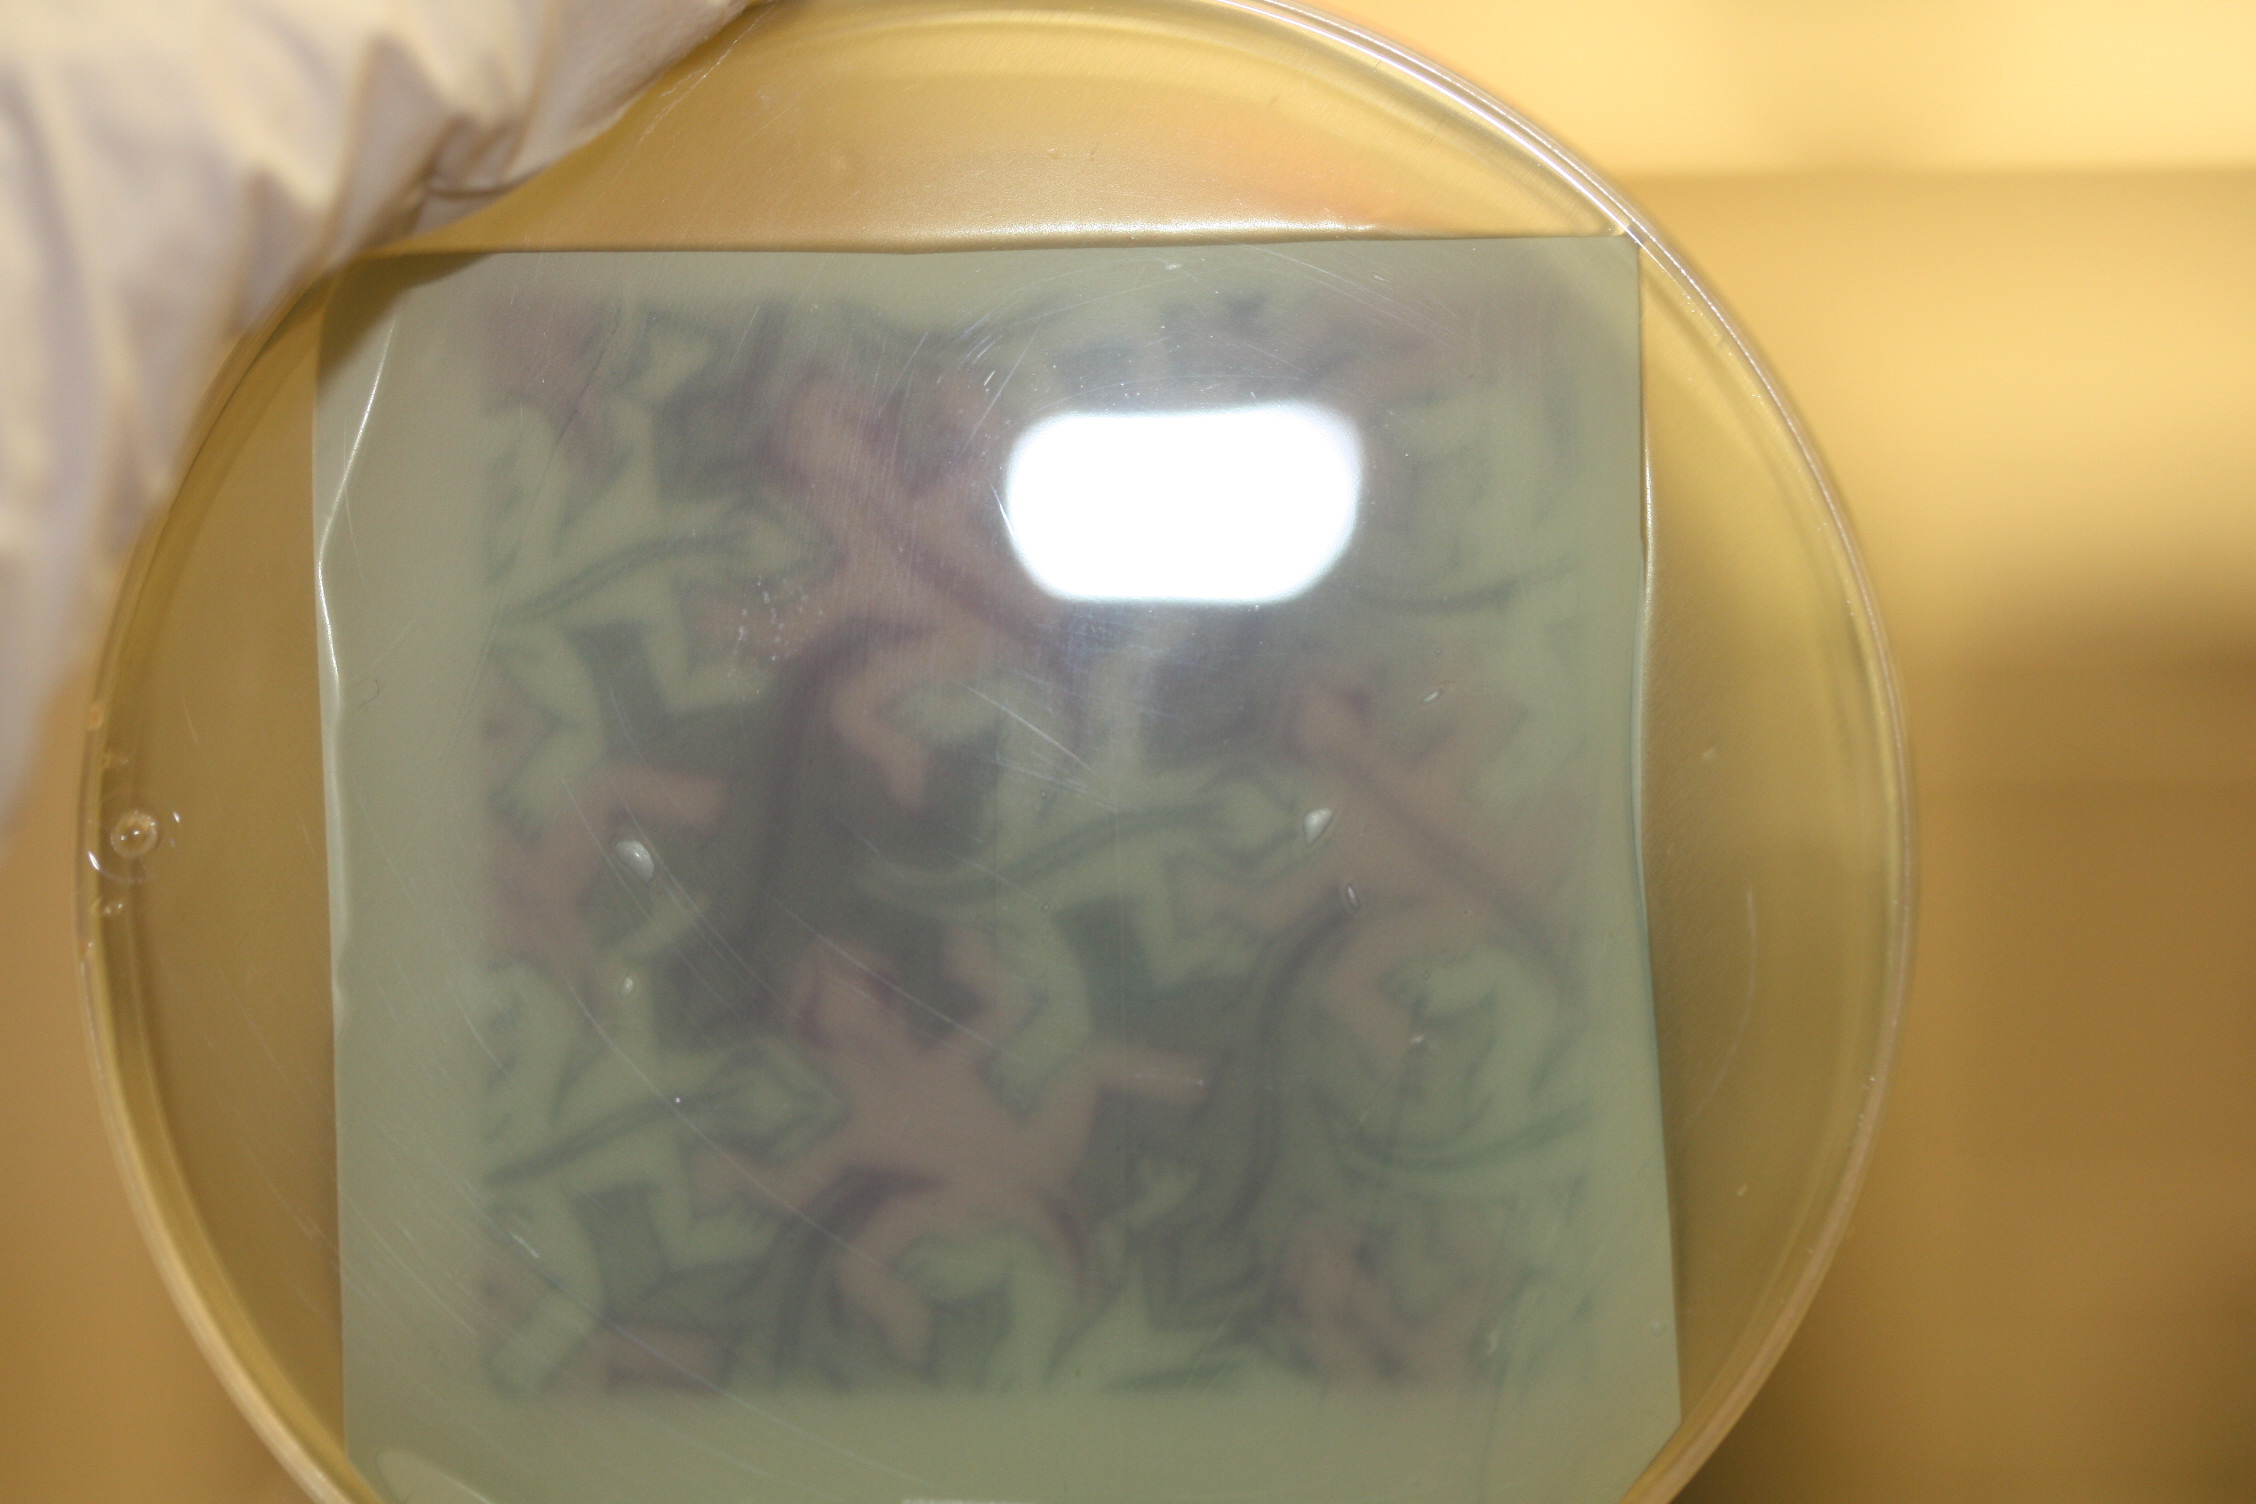 Scientists Engineered Bacteria To Make Picture Of Super Mario